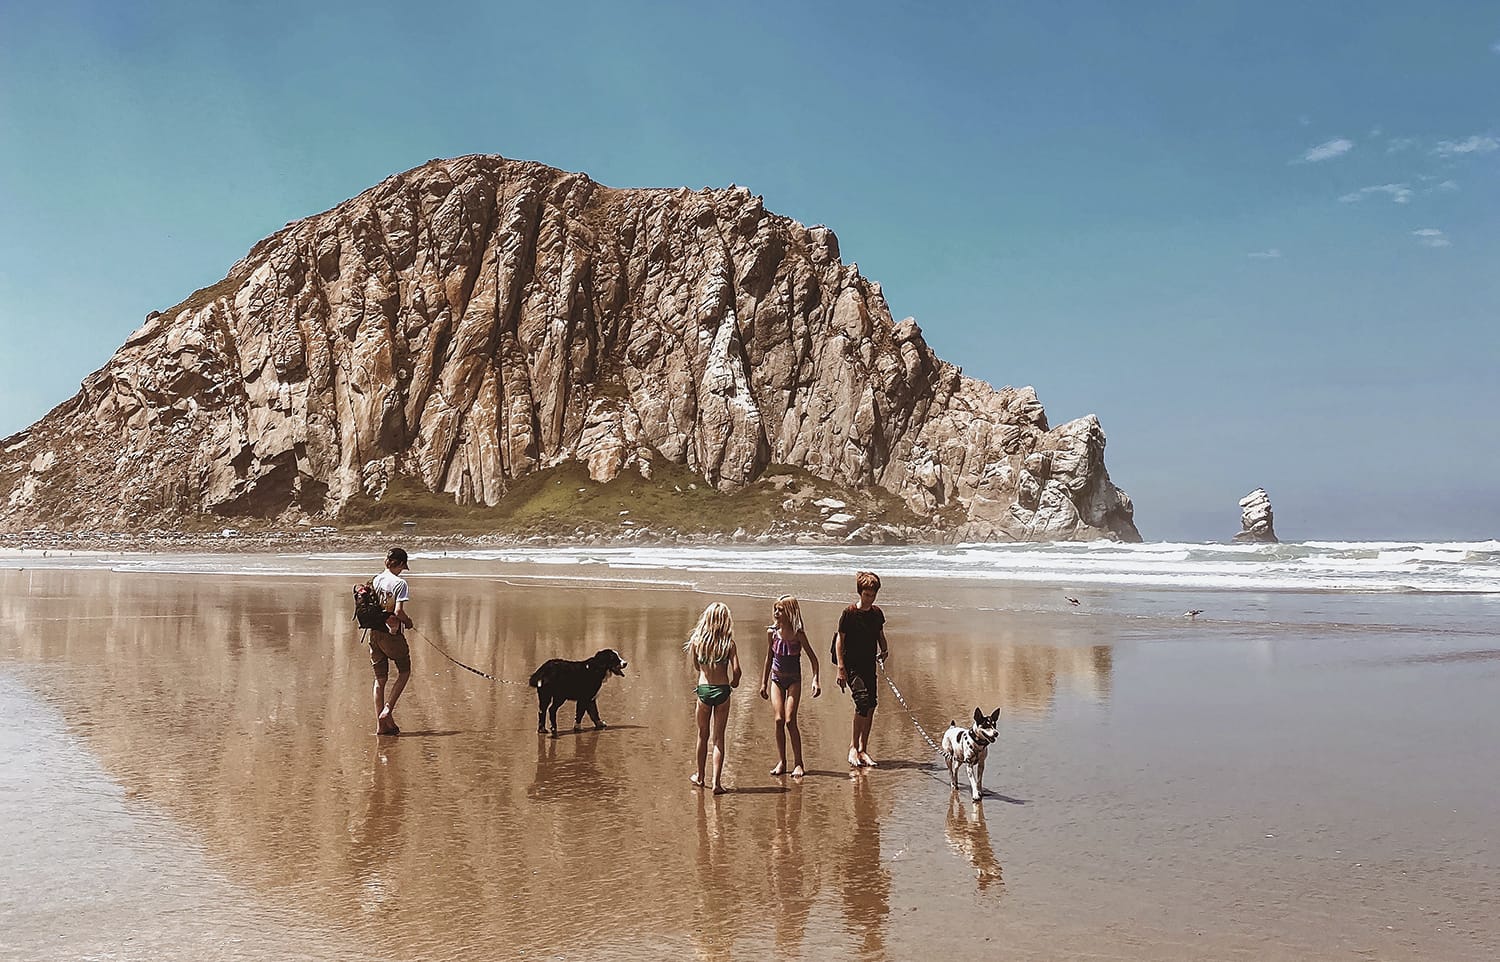 Photograph of a family on the beach at the shoreline with their dog, overlooked by a huge rock